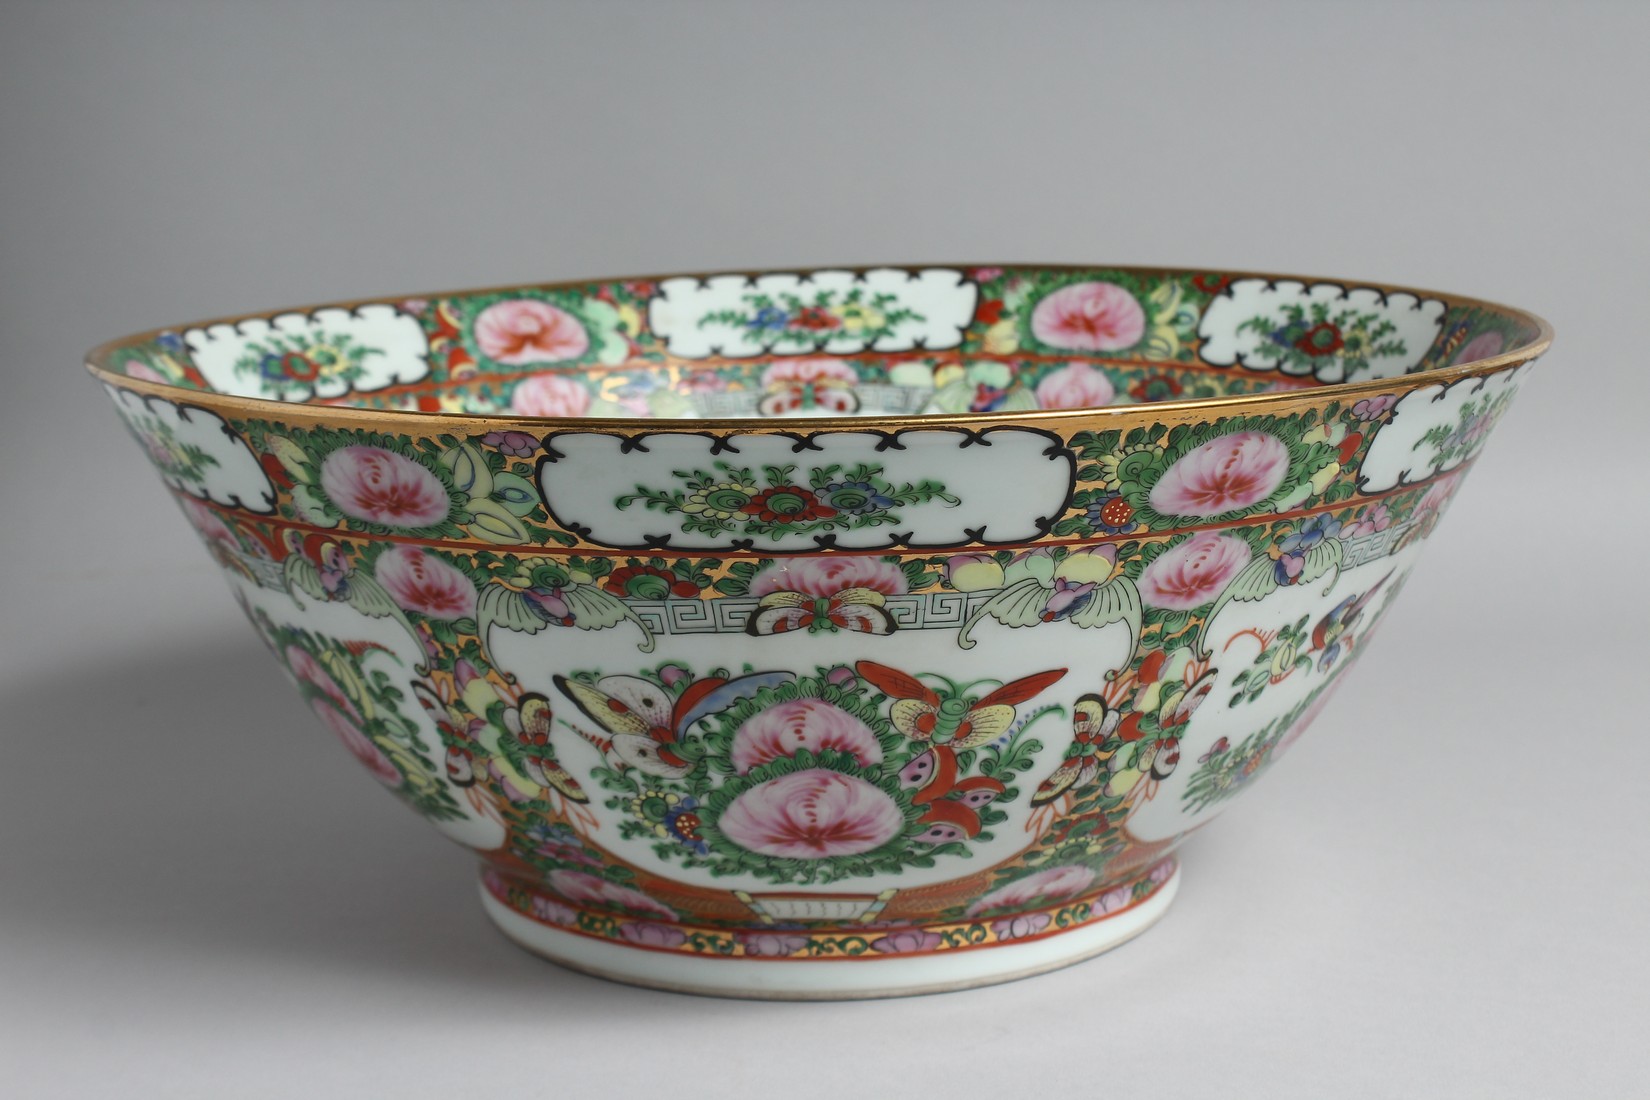 A LARGE CHINESE CANTON PORCELAIN PUNCH BOWL, painted with multiple panels of floral motifs and - Image 3 of 6